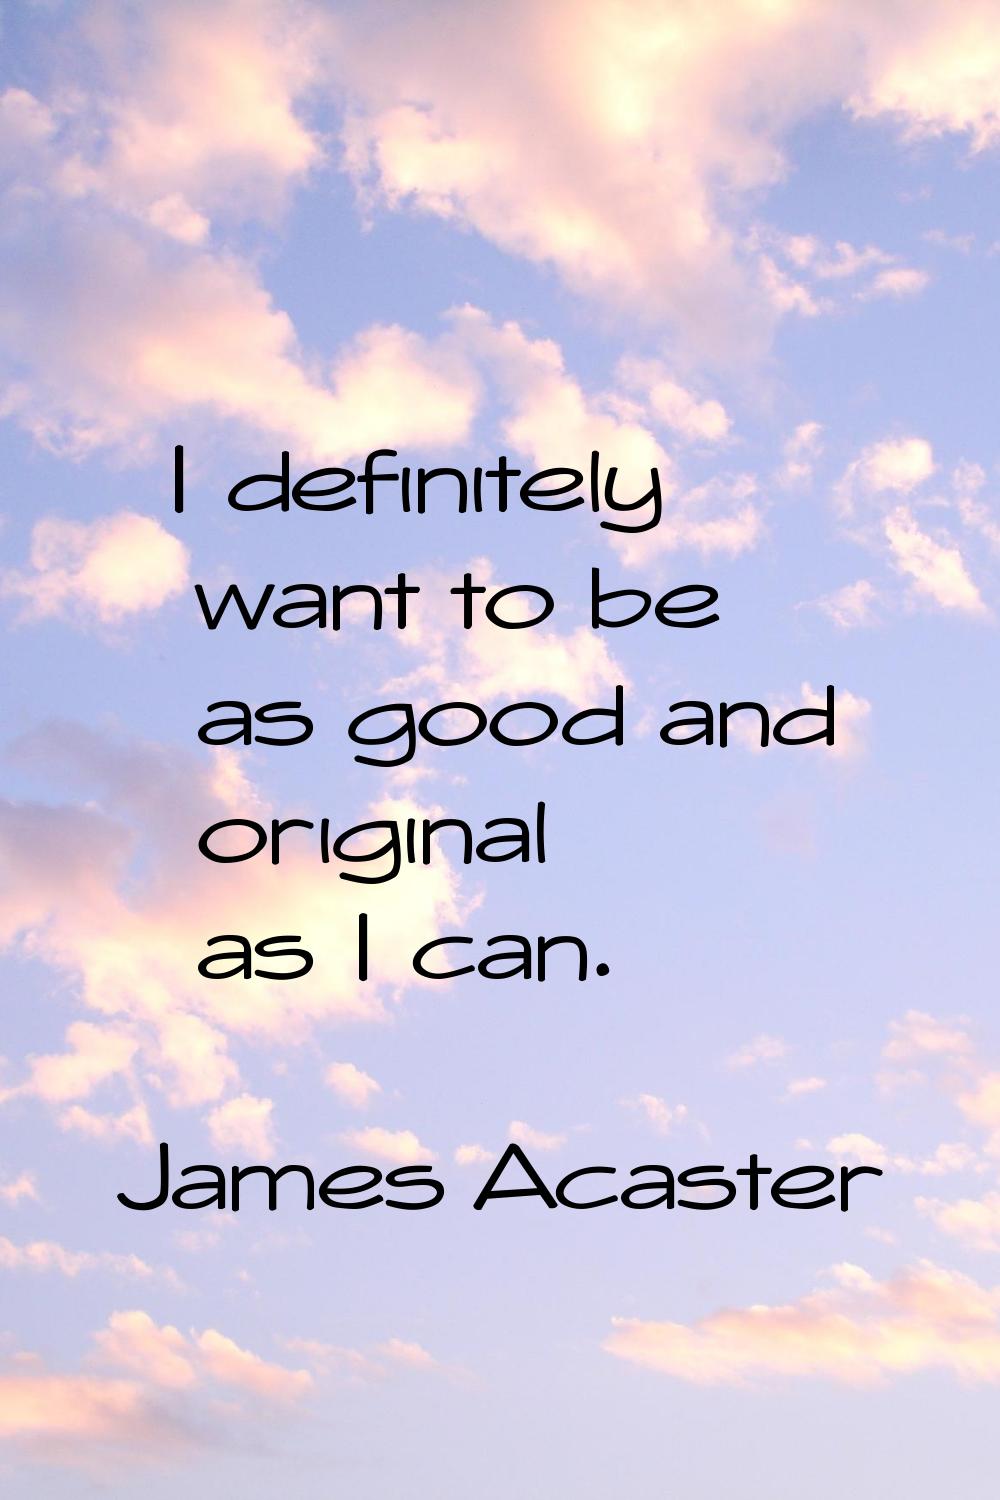 I definitely want to be as good and original as I can.